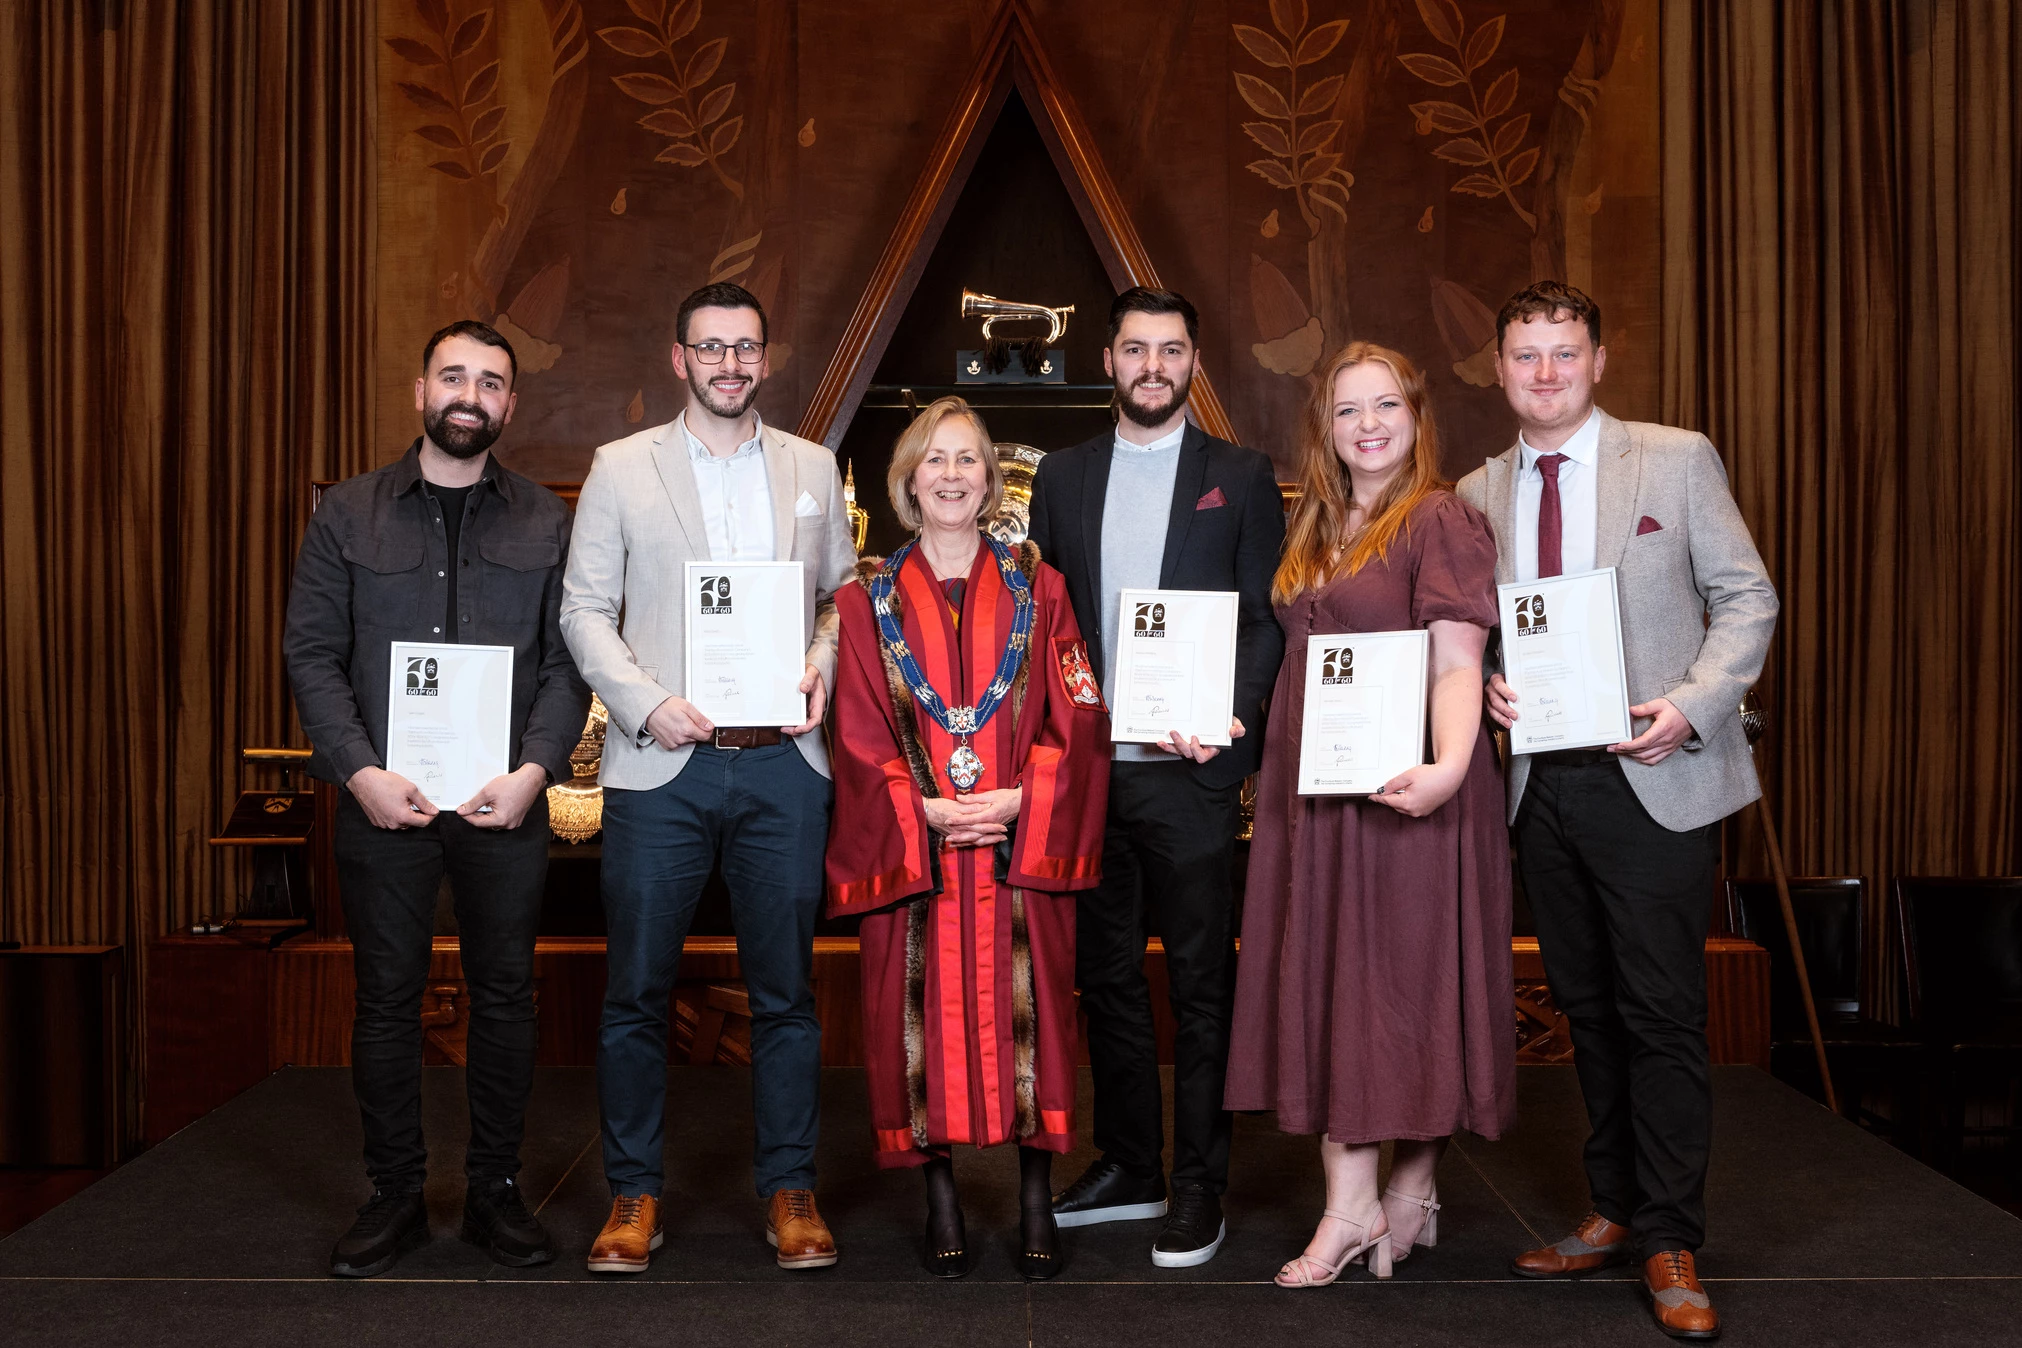 Amanda Waring, Master of the Furniture Makers’ Company, with some of the winners of the Furniture Makers’ Company’s ‘60 for 60’ in the North West: (L to R) Sam Coggin, Mark Denby, Nathan Whiffing, Hannah Shore and Jordan Hargadon